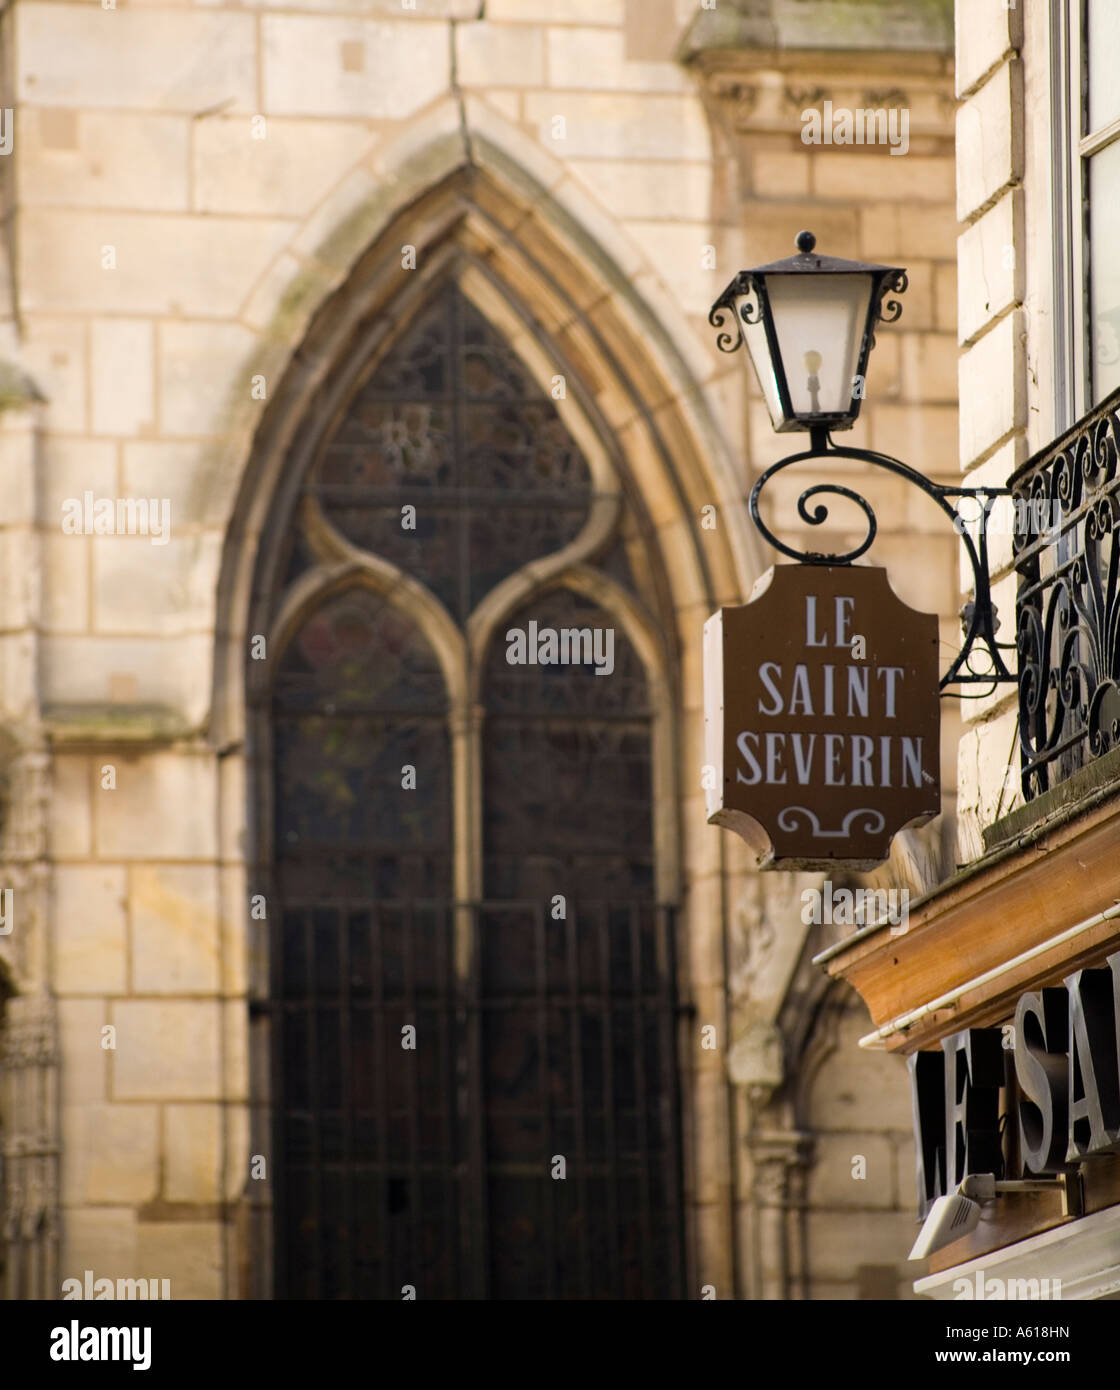 Rue Saint Severin with Le Saint Severin and the church of Saint Severin in the background Paris France Stock Photo